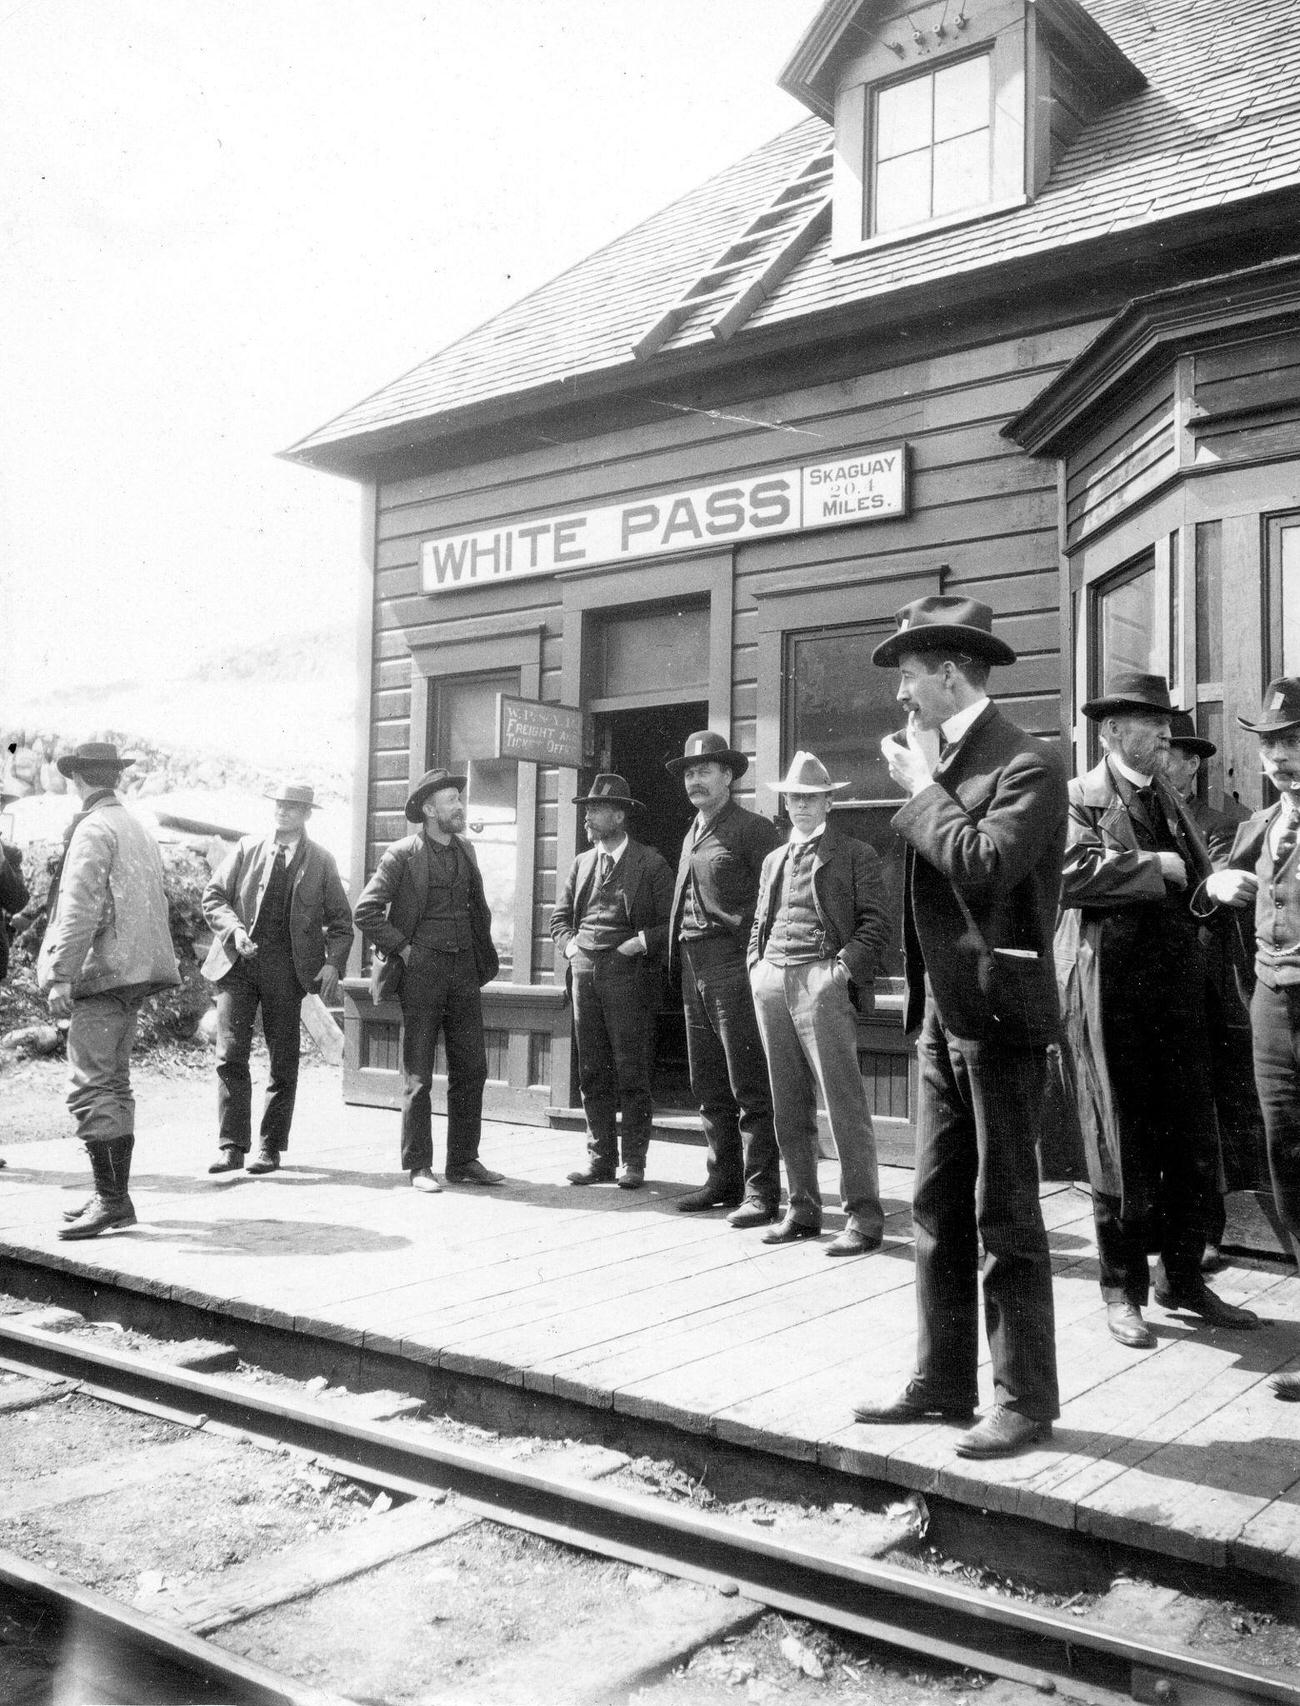 Prospectors at the White Pass and Yukon Railroad Station in Alaska during the Klondike Gold Rush, 1900.